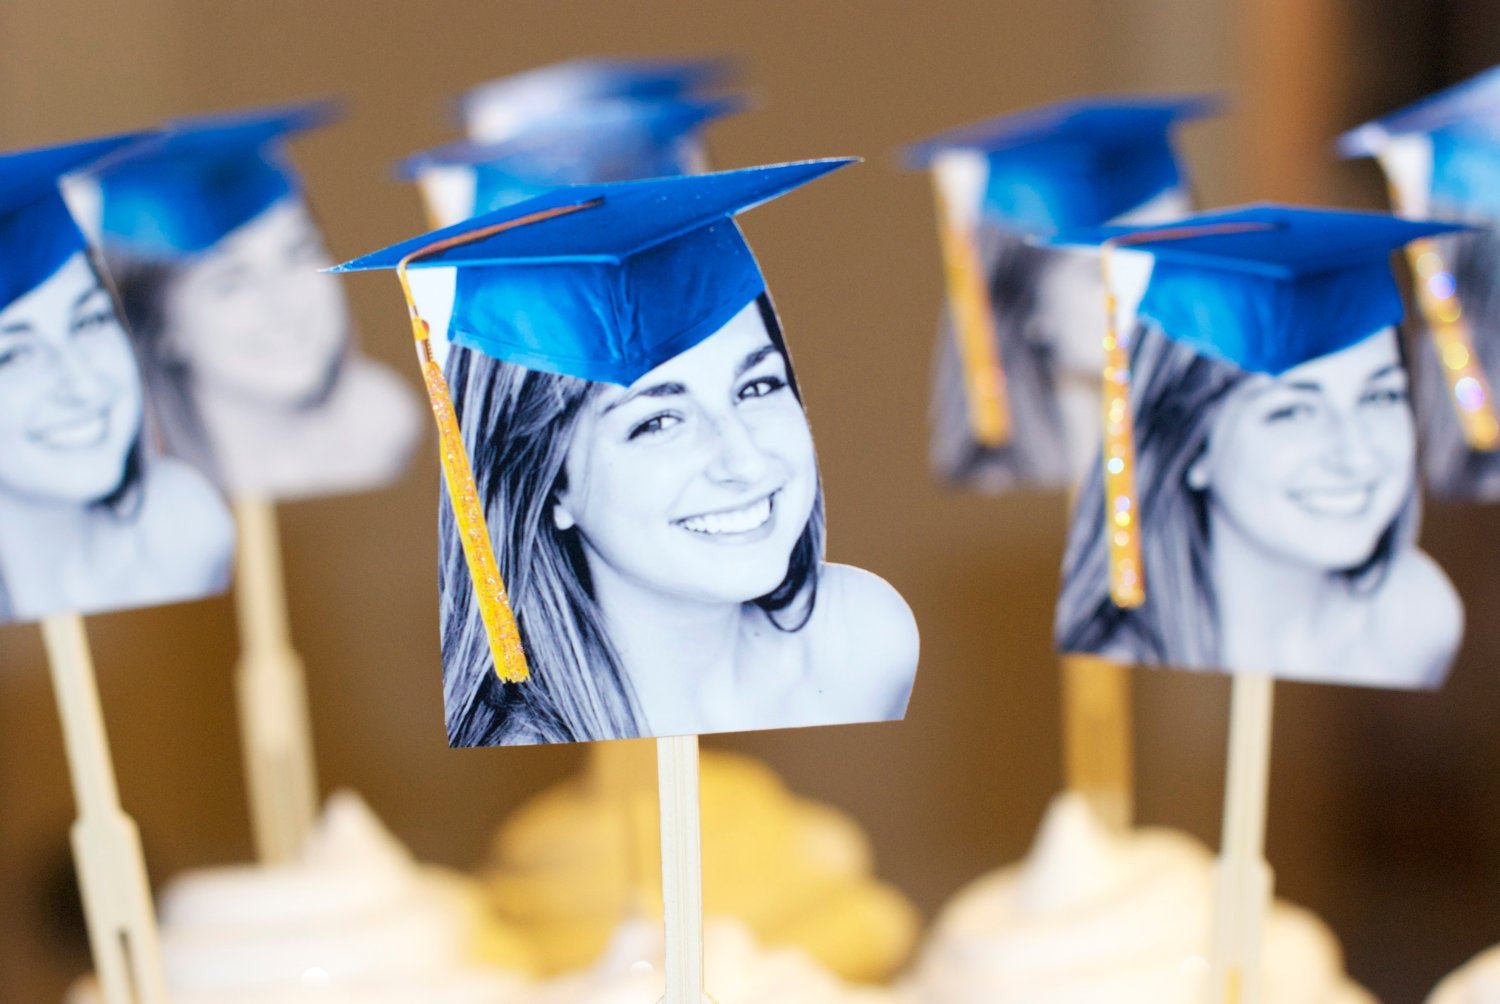 Personalized Graduation Party Ideas
 Personalized graduation hat photo cupcake toppers